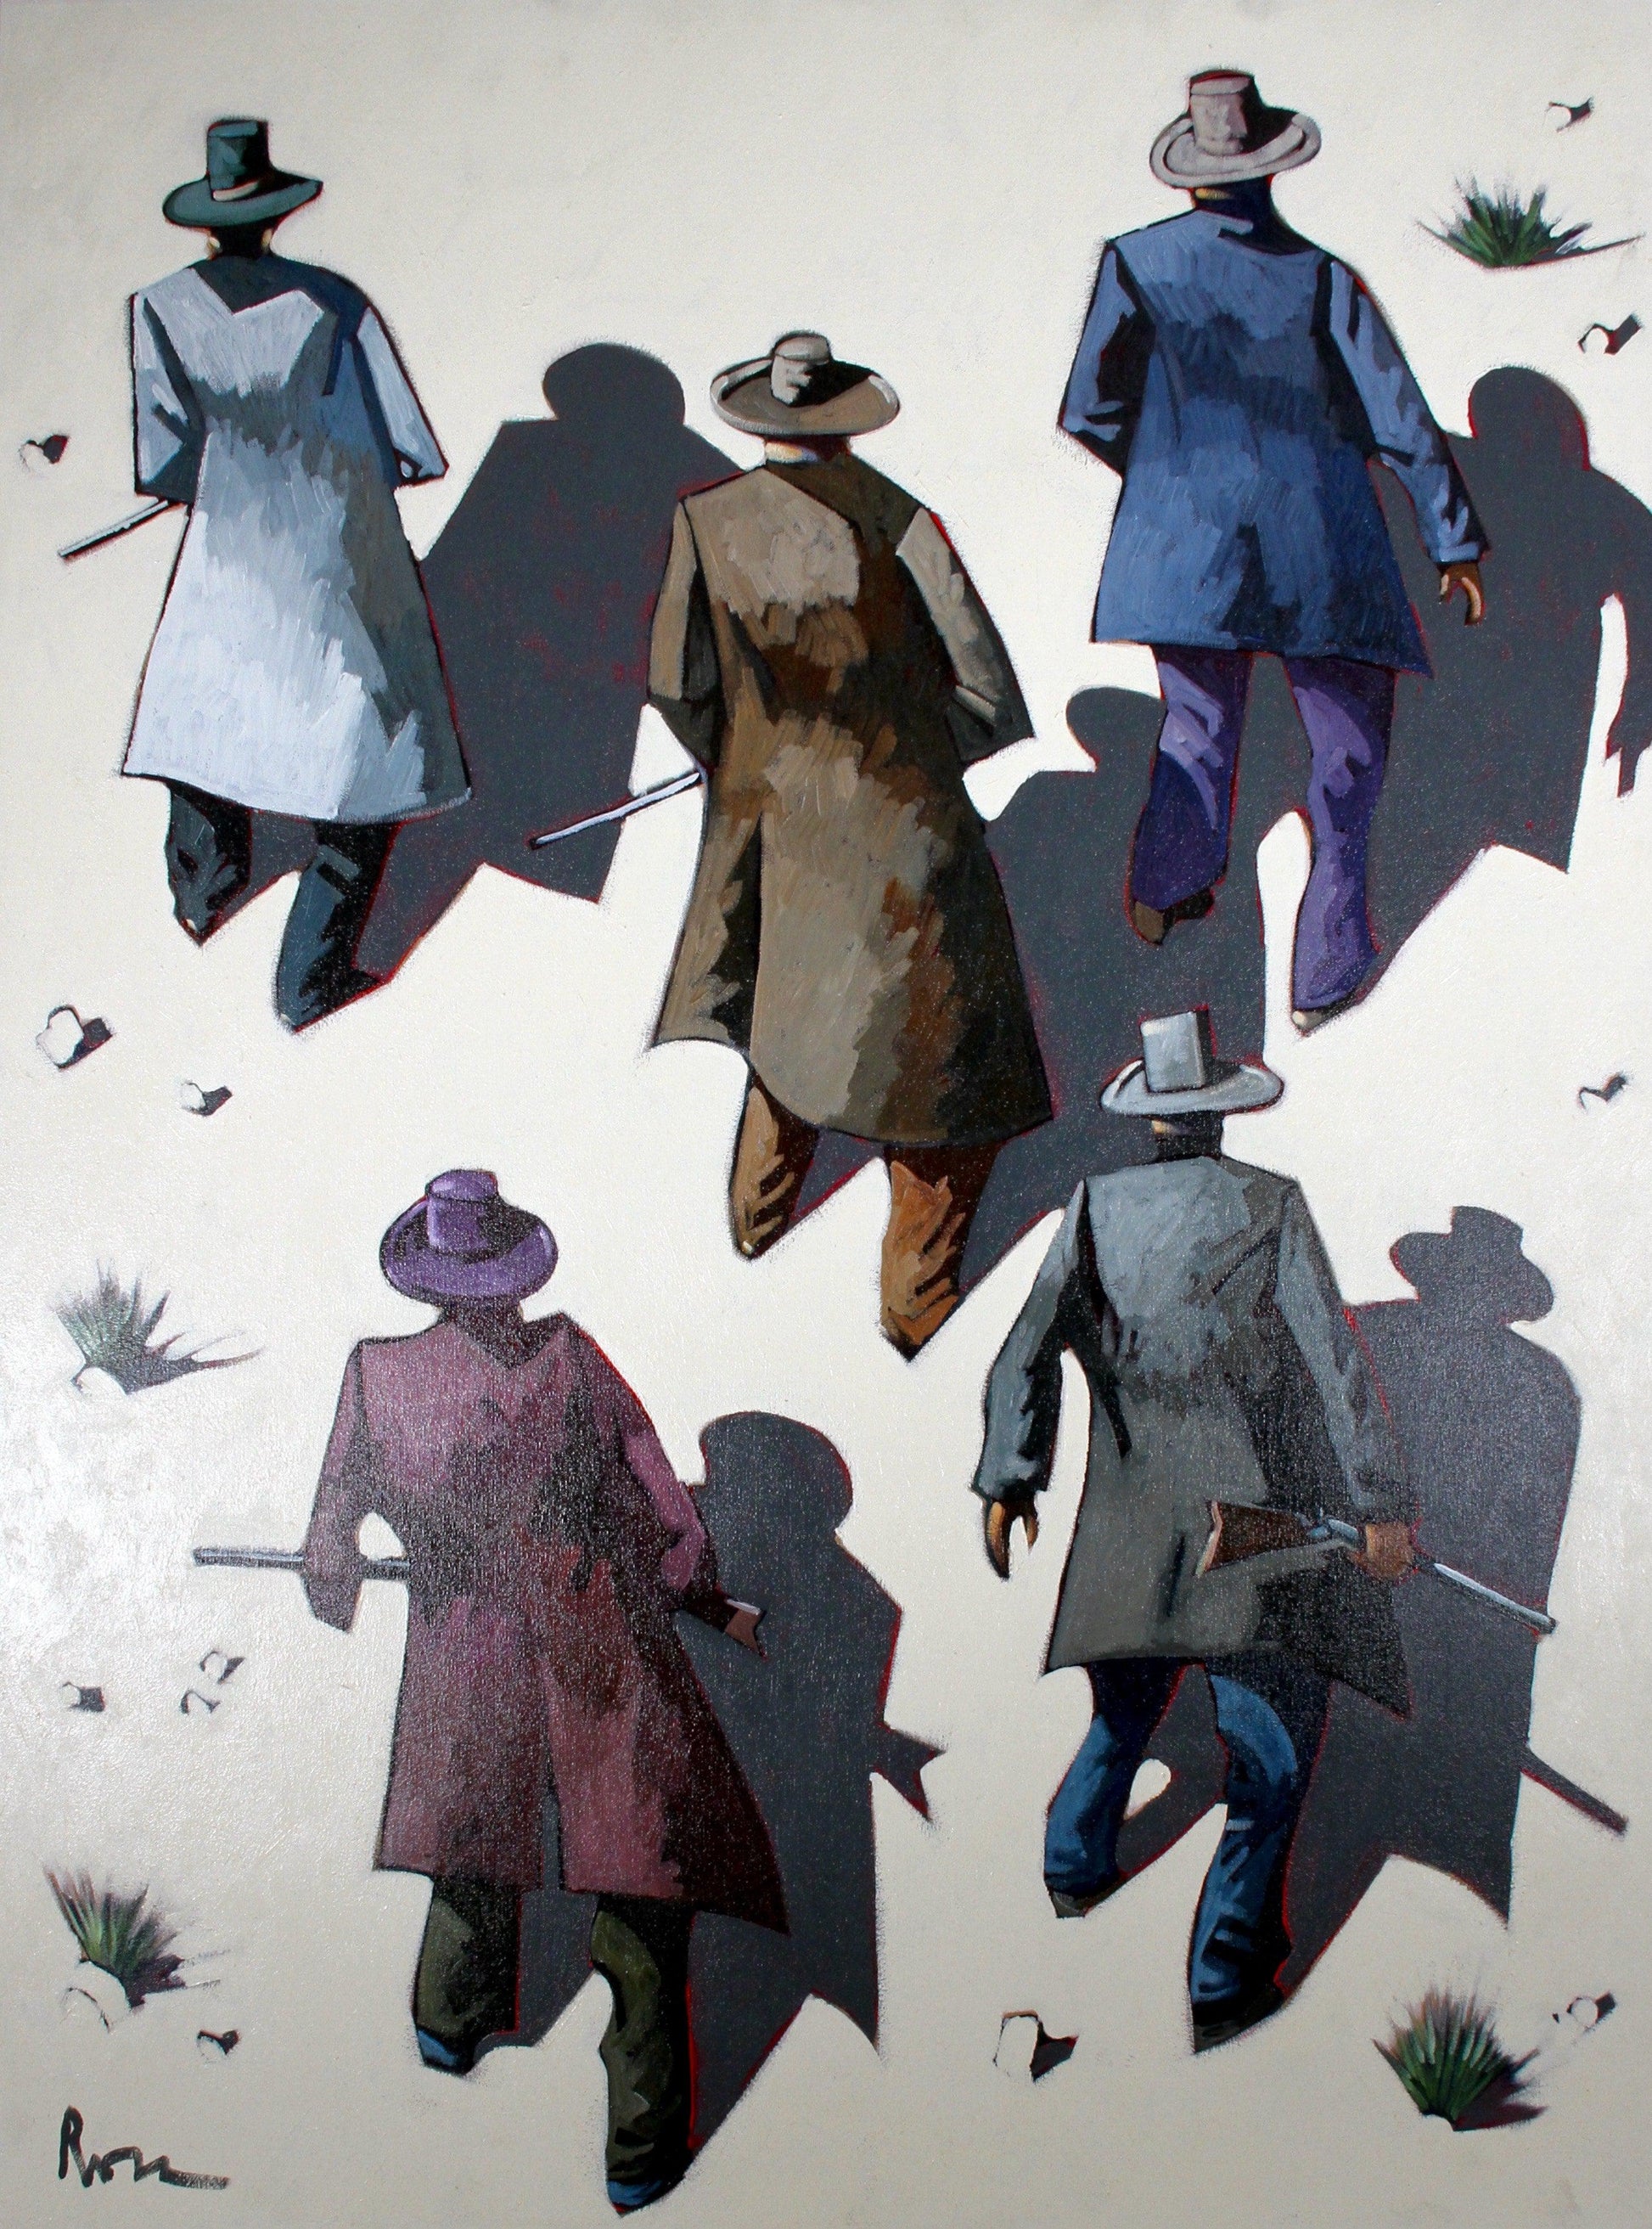 Trouble in the Desert-Painting-Thom Ross-Sorrel Sky Gallery